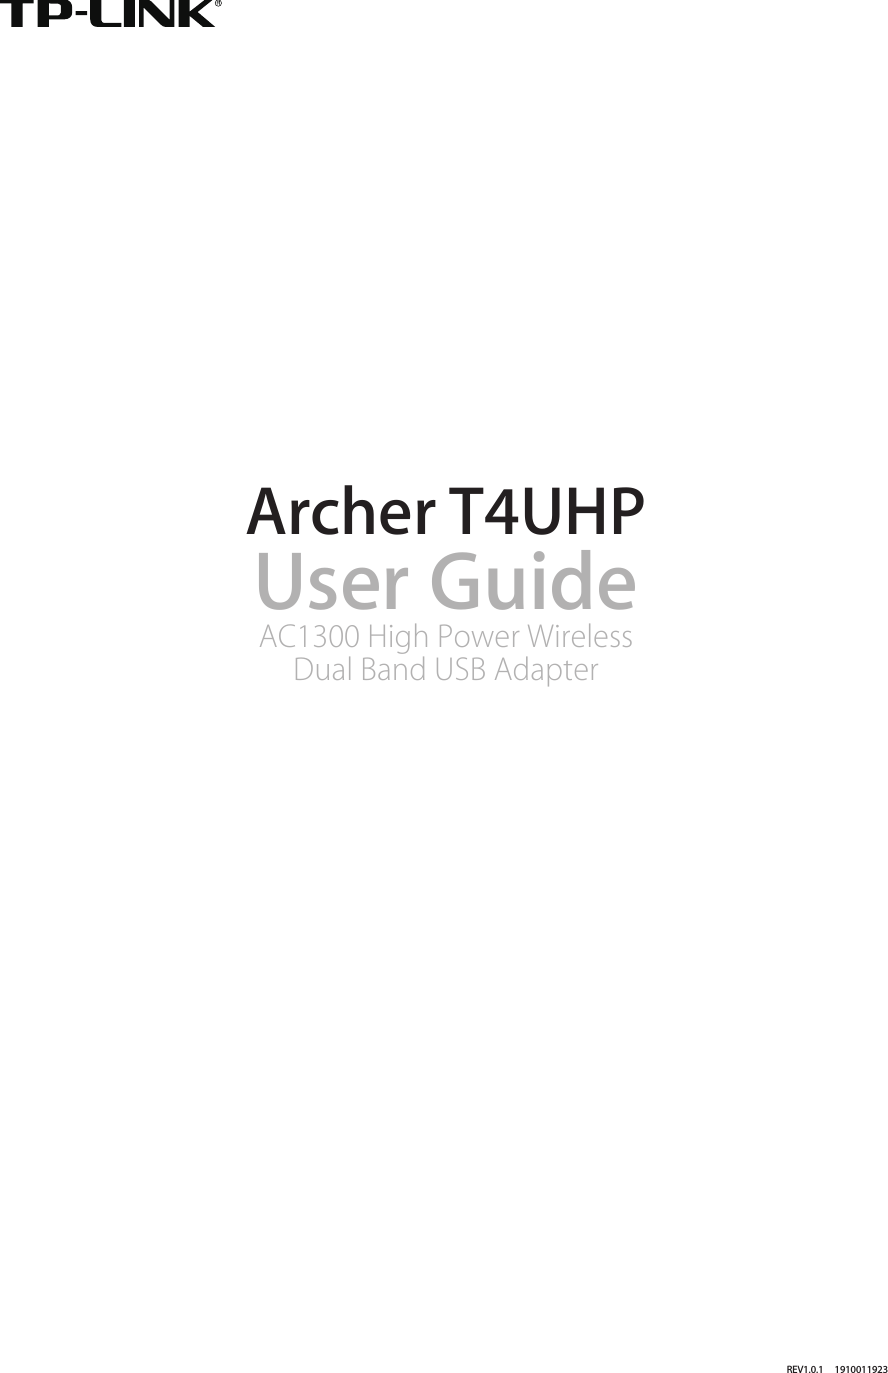 REV1.0.1     1910011923Archer T4UHPUser GuideAC1300 High Power Wireless Dual Band USB Adapter